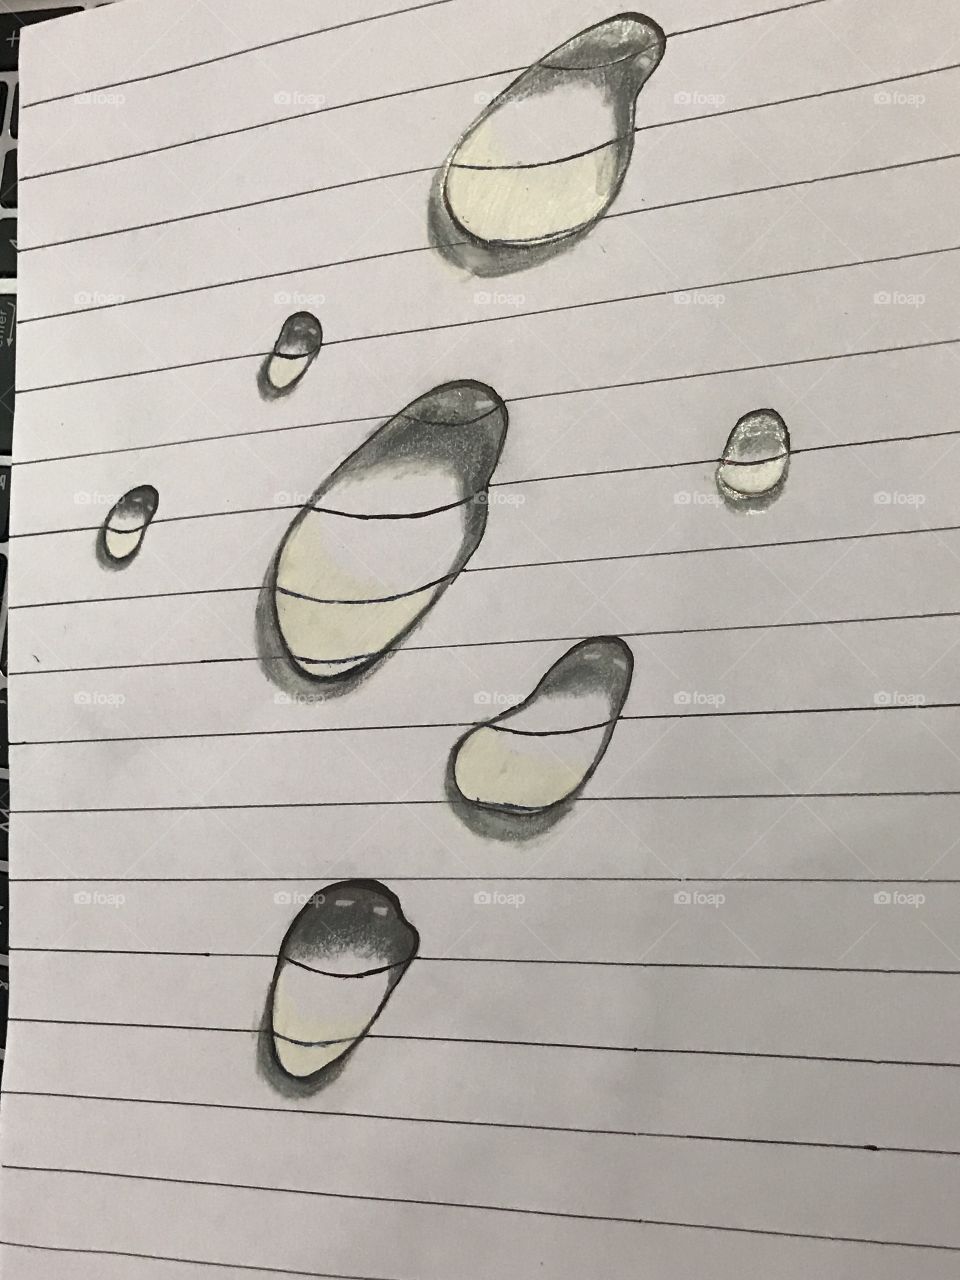 Water drop on paper by drawing